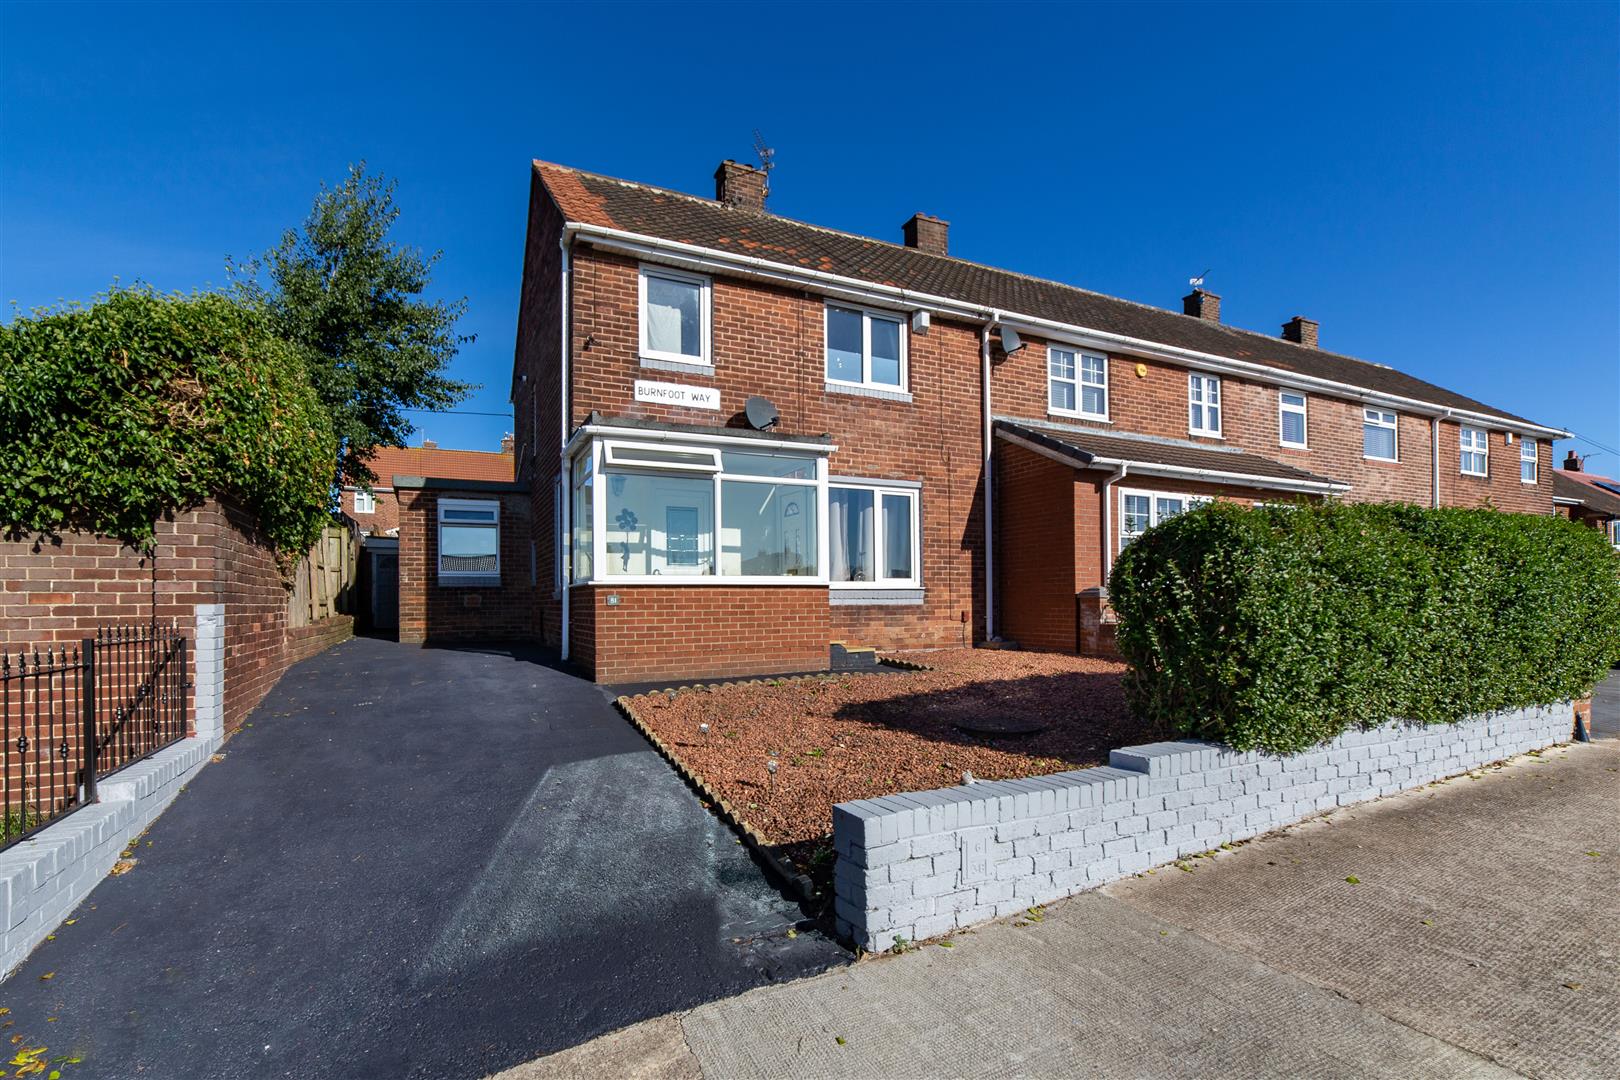 3 bed terraced house for sale in Burnfoot Way, Kenton - Property Image 1